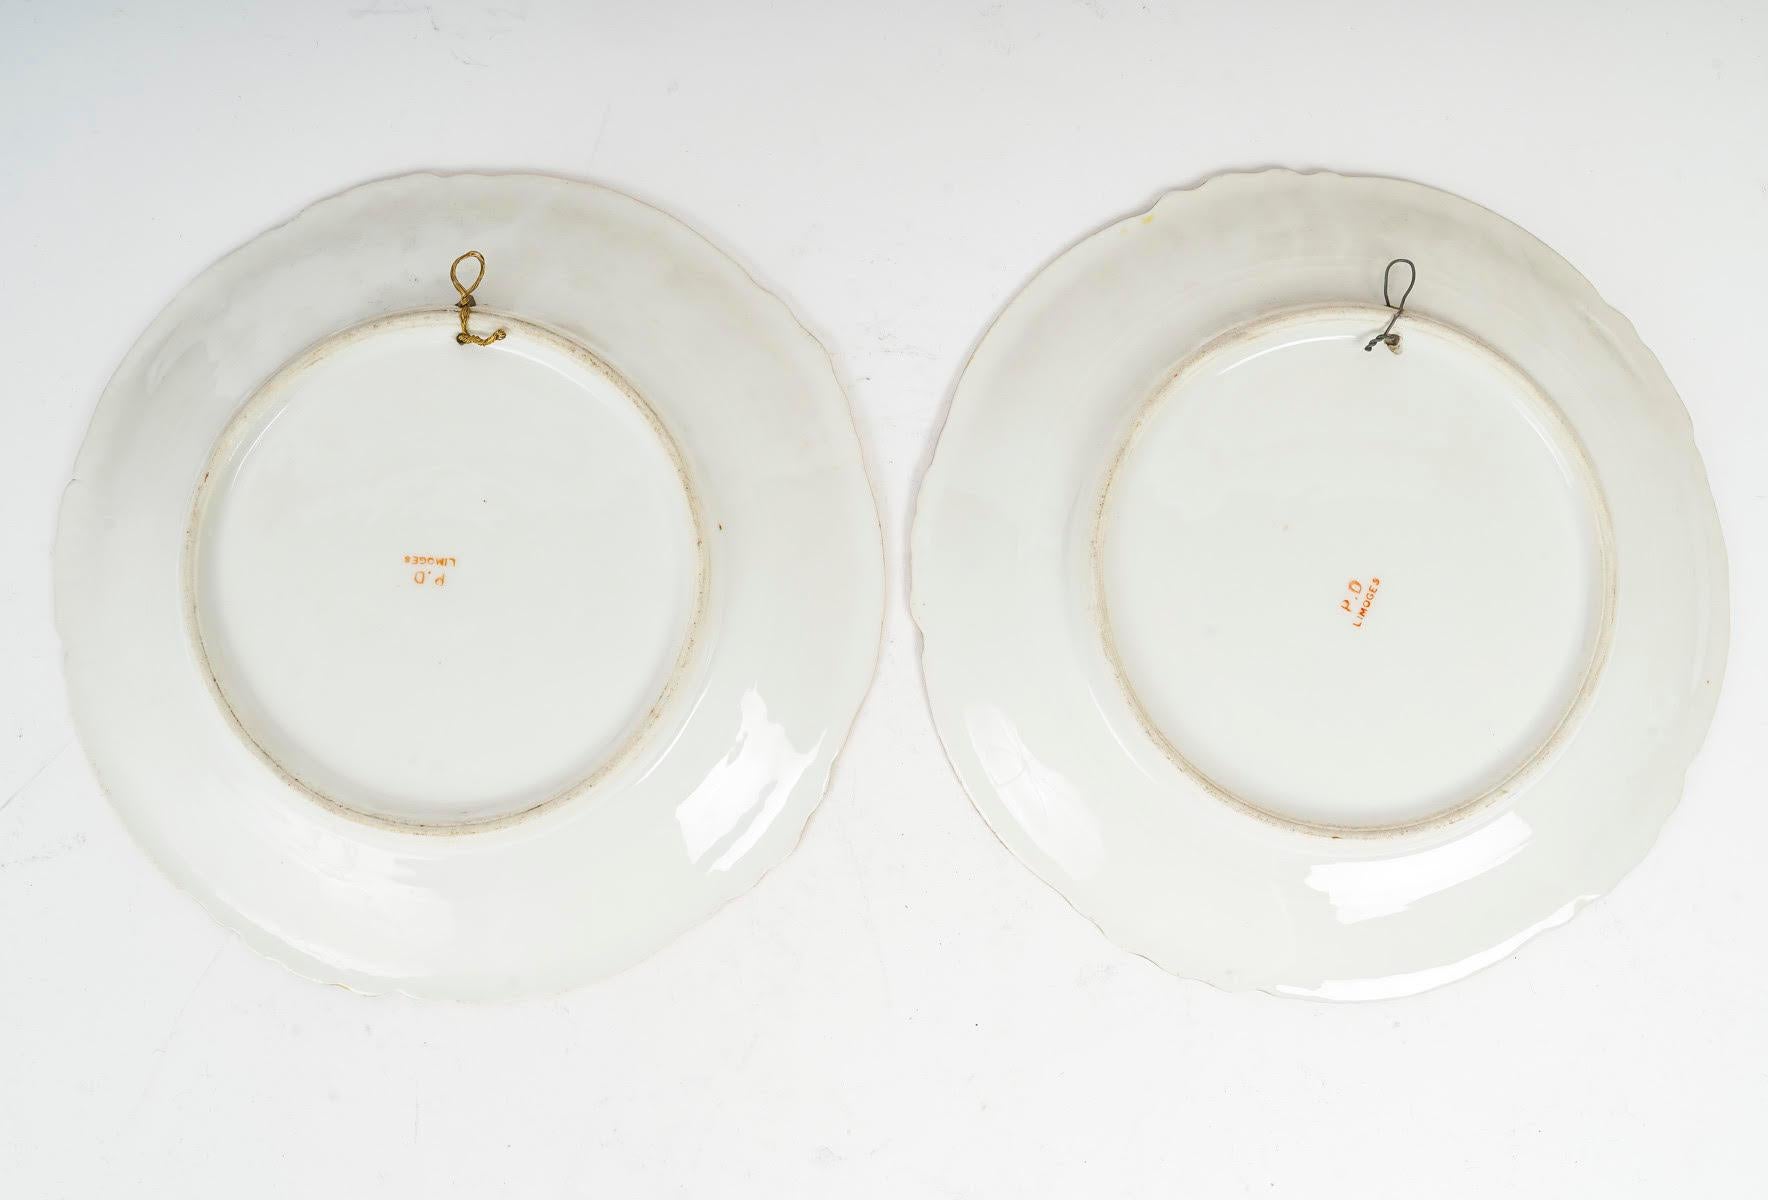 Pair of Decorative Plates in Limoges Porcelain, Napoleon III Period. For Sale 3